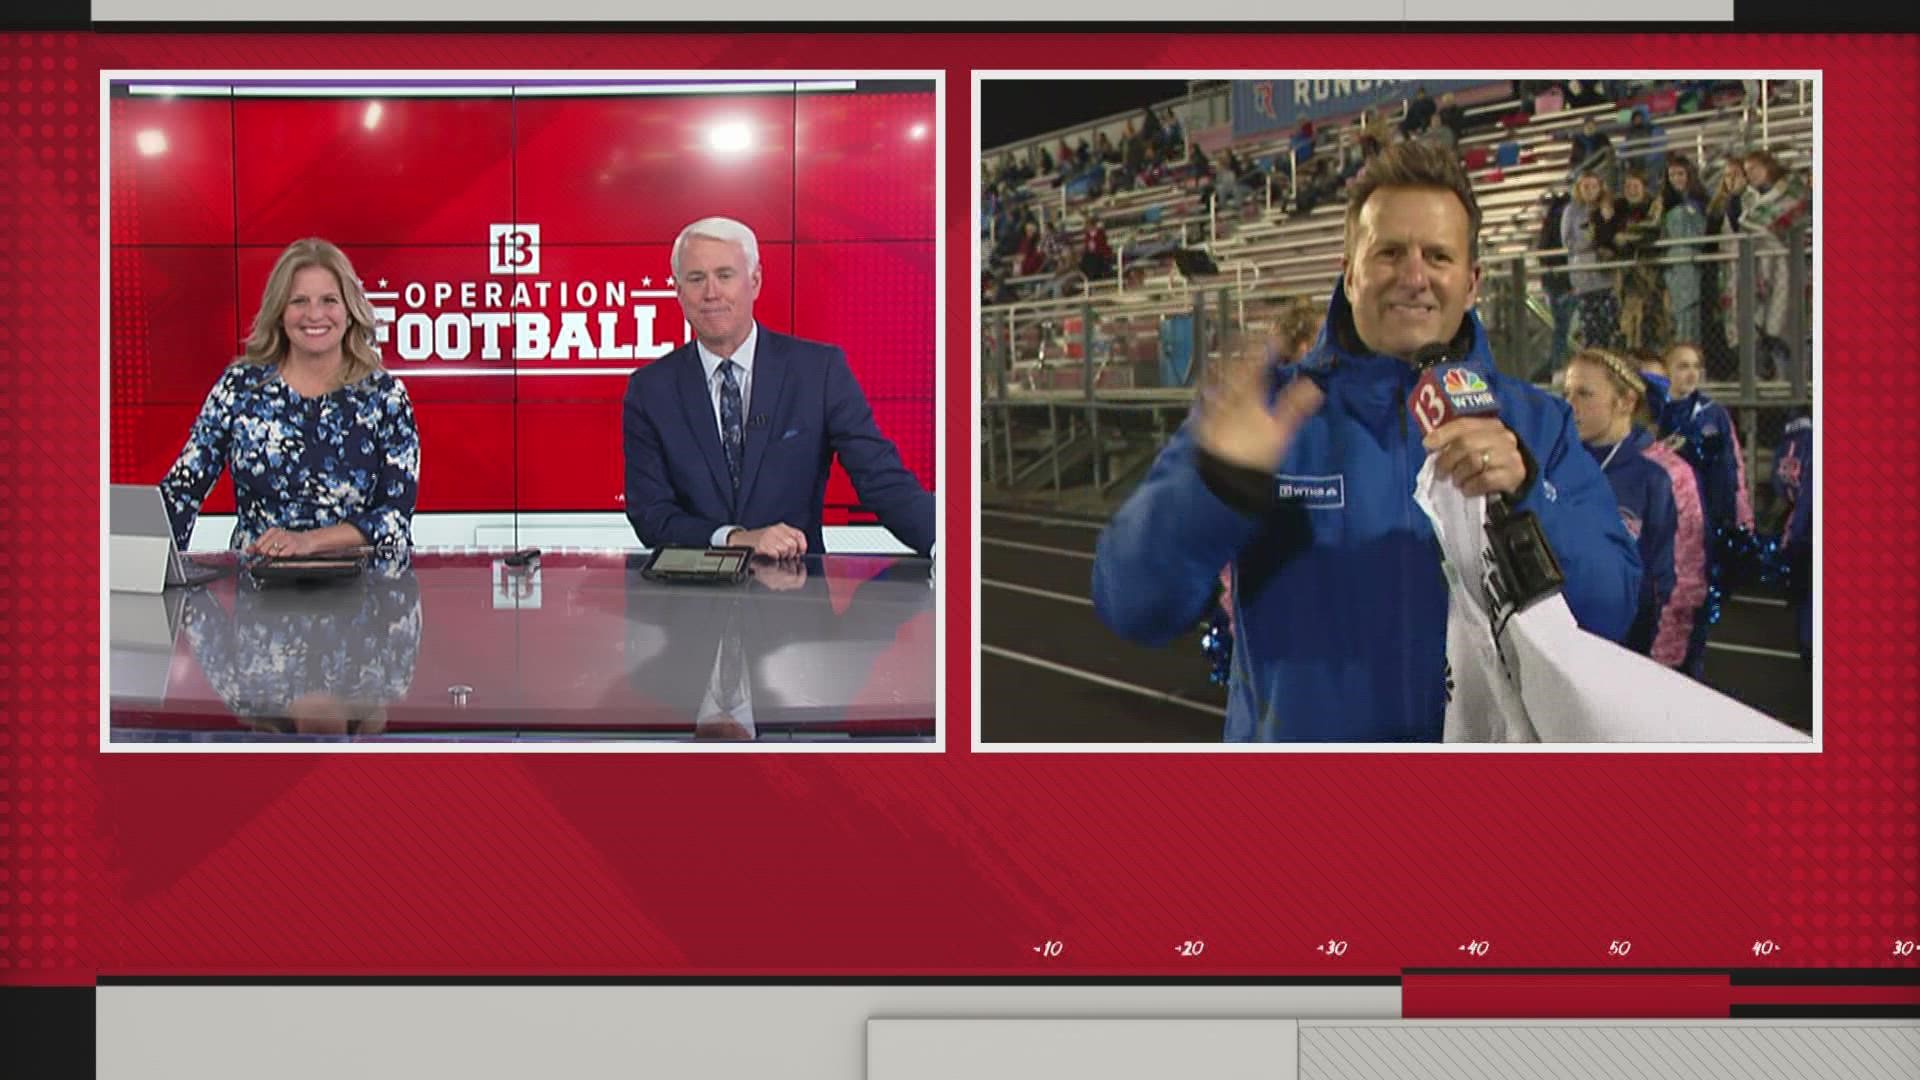 Dave Calabro is at Roncalli High School for Week 12 of Operation Football.